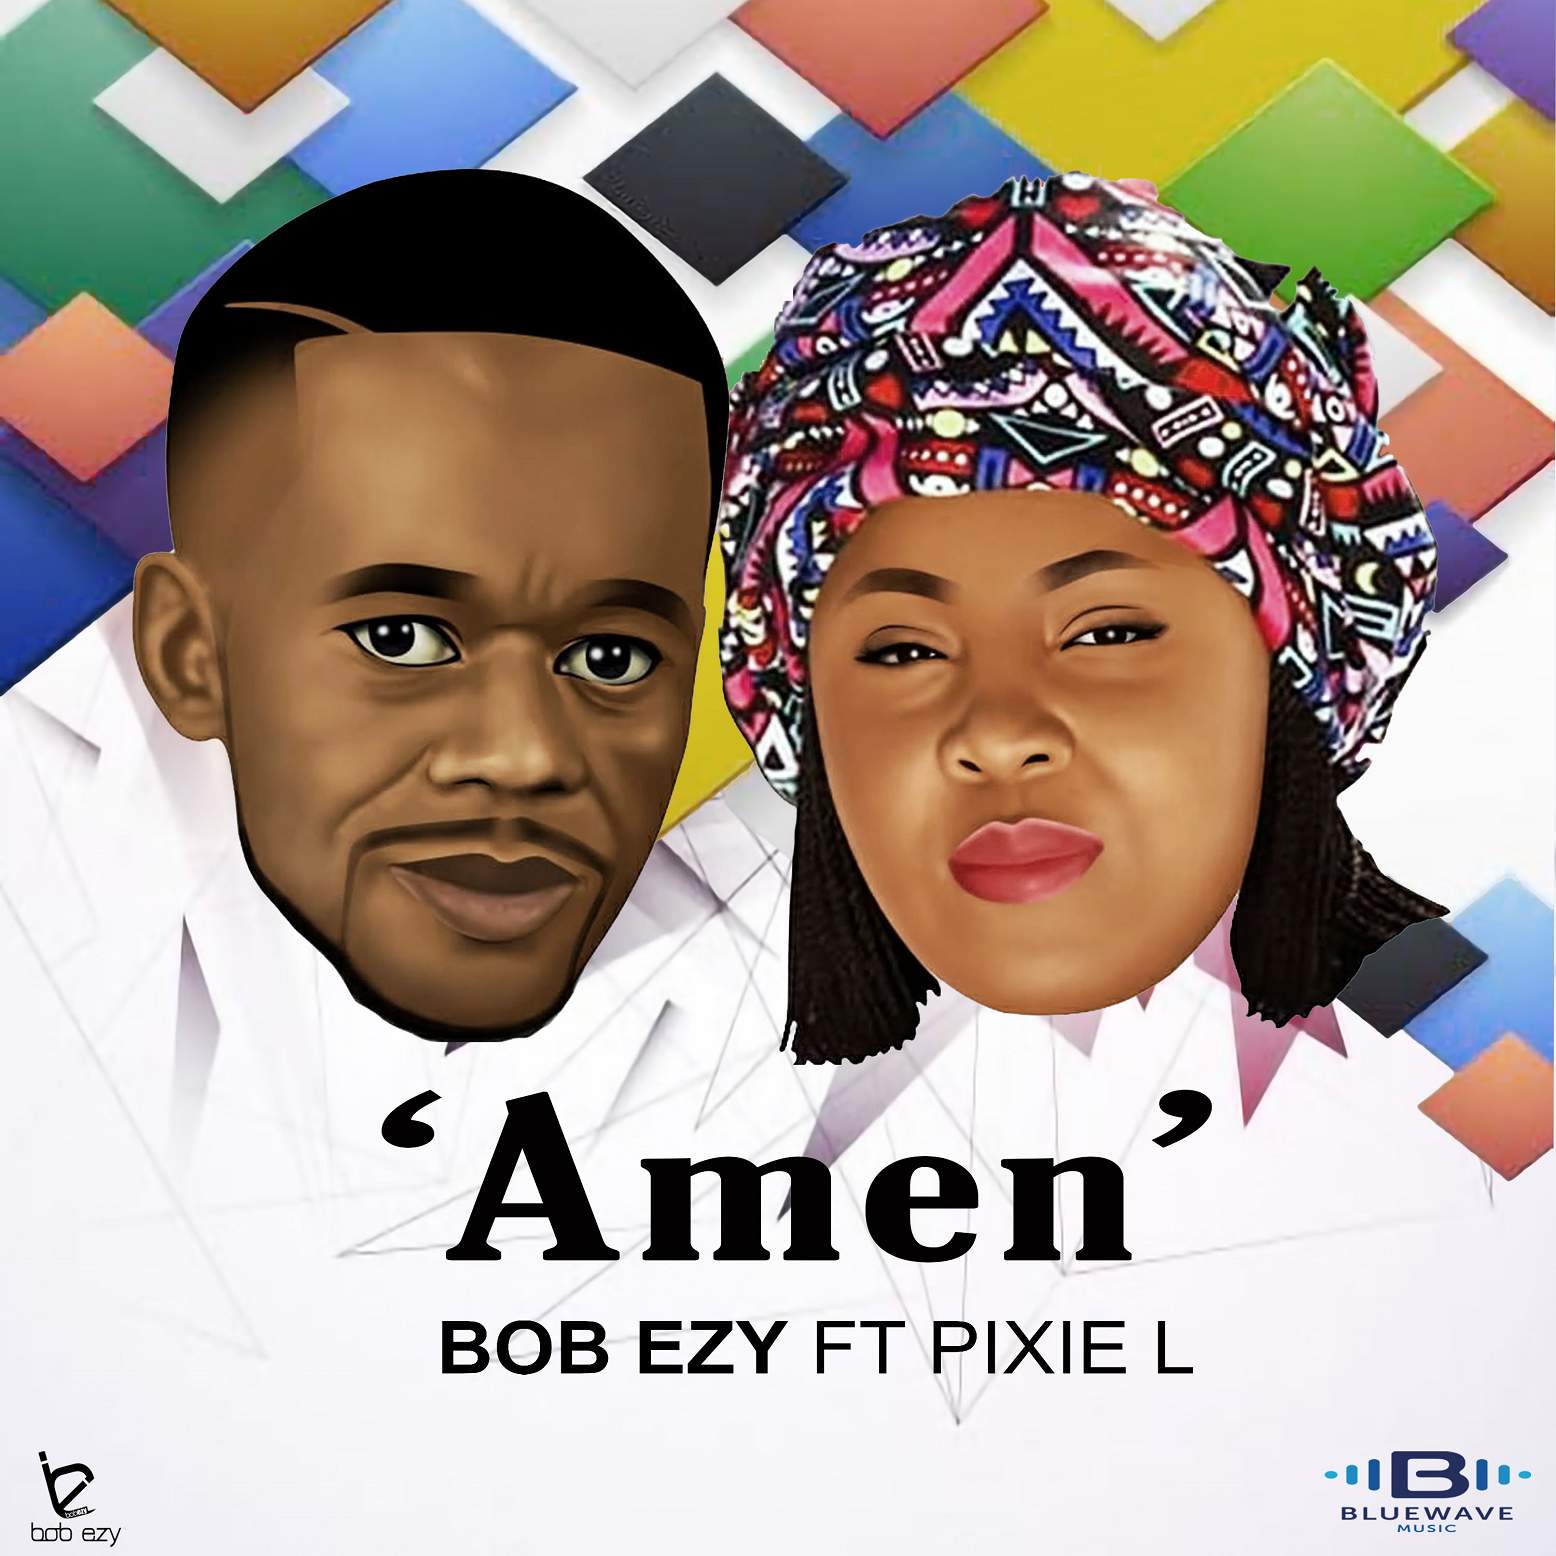 AMEN, sees Bob Ezy, plots a combination of dope beats and stunning instrumentals that would easily gladden the hearts and soul of a sadist. With Pixie L's celestial vocals, it just doesn't get better than this for the wave of Afro House music sweeping across the African continent.